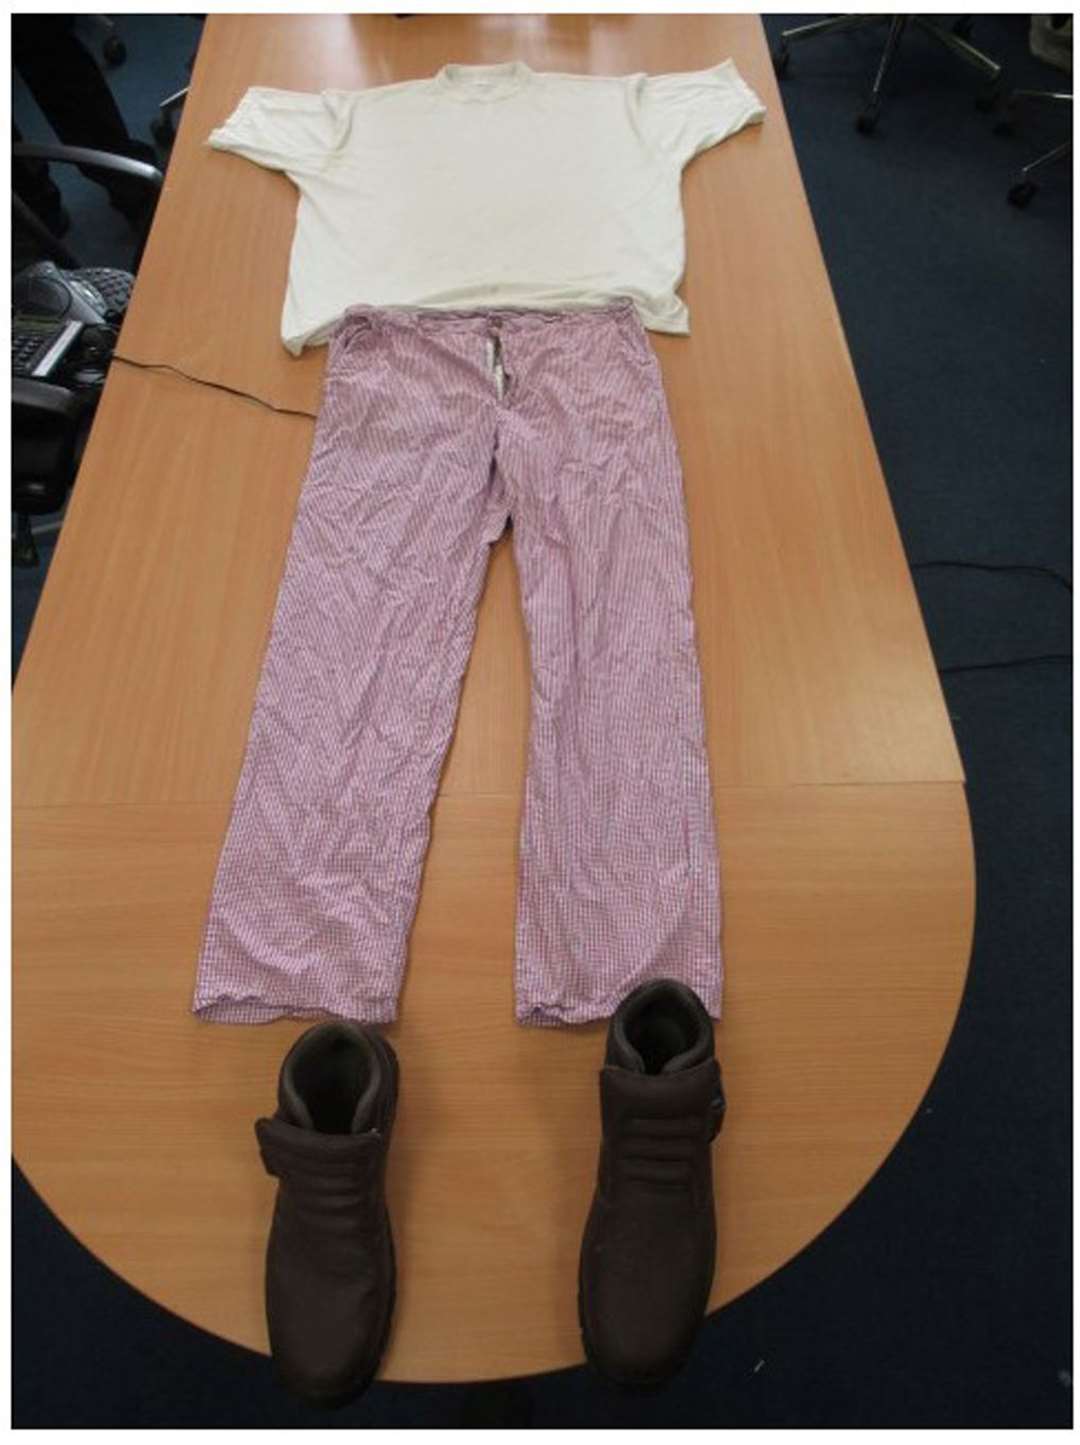 The chef’s clothing and footwear that Daniel Khalife was wearing following his escape from HMP Wandsworth (Metropolitan Police/PA)